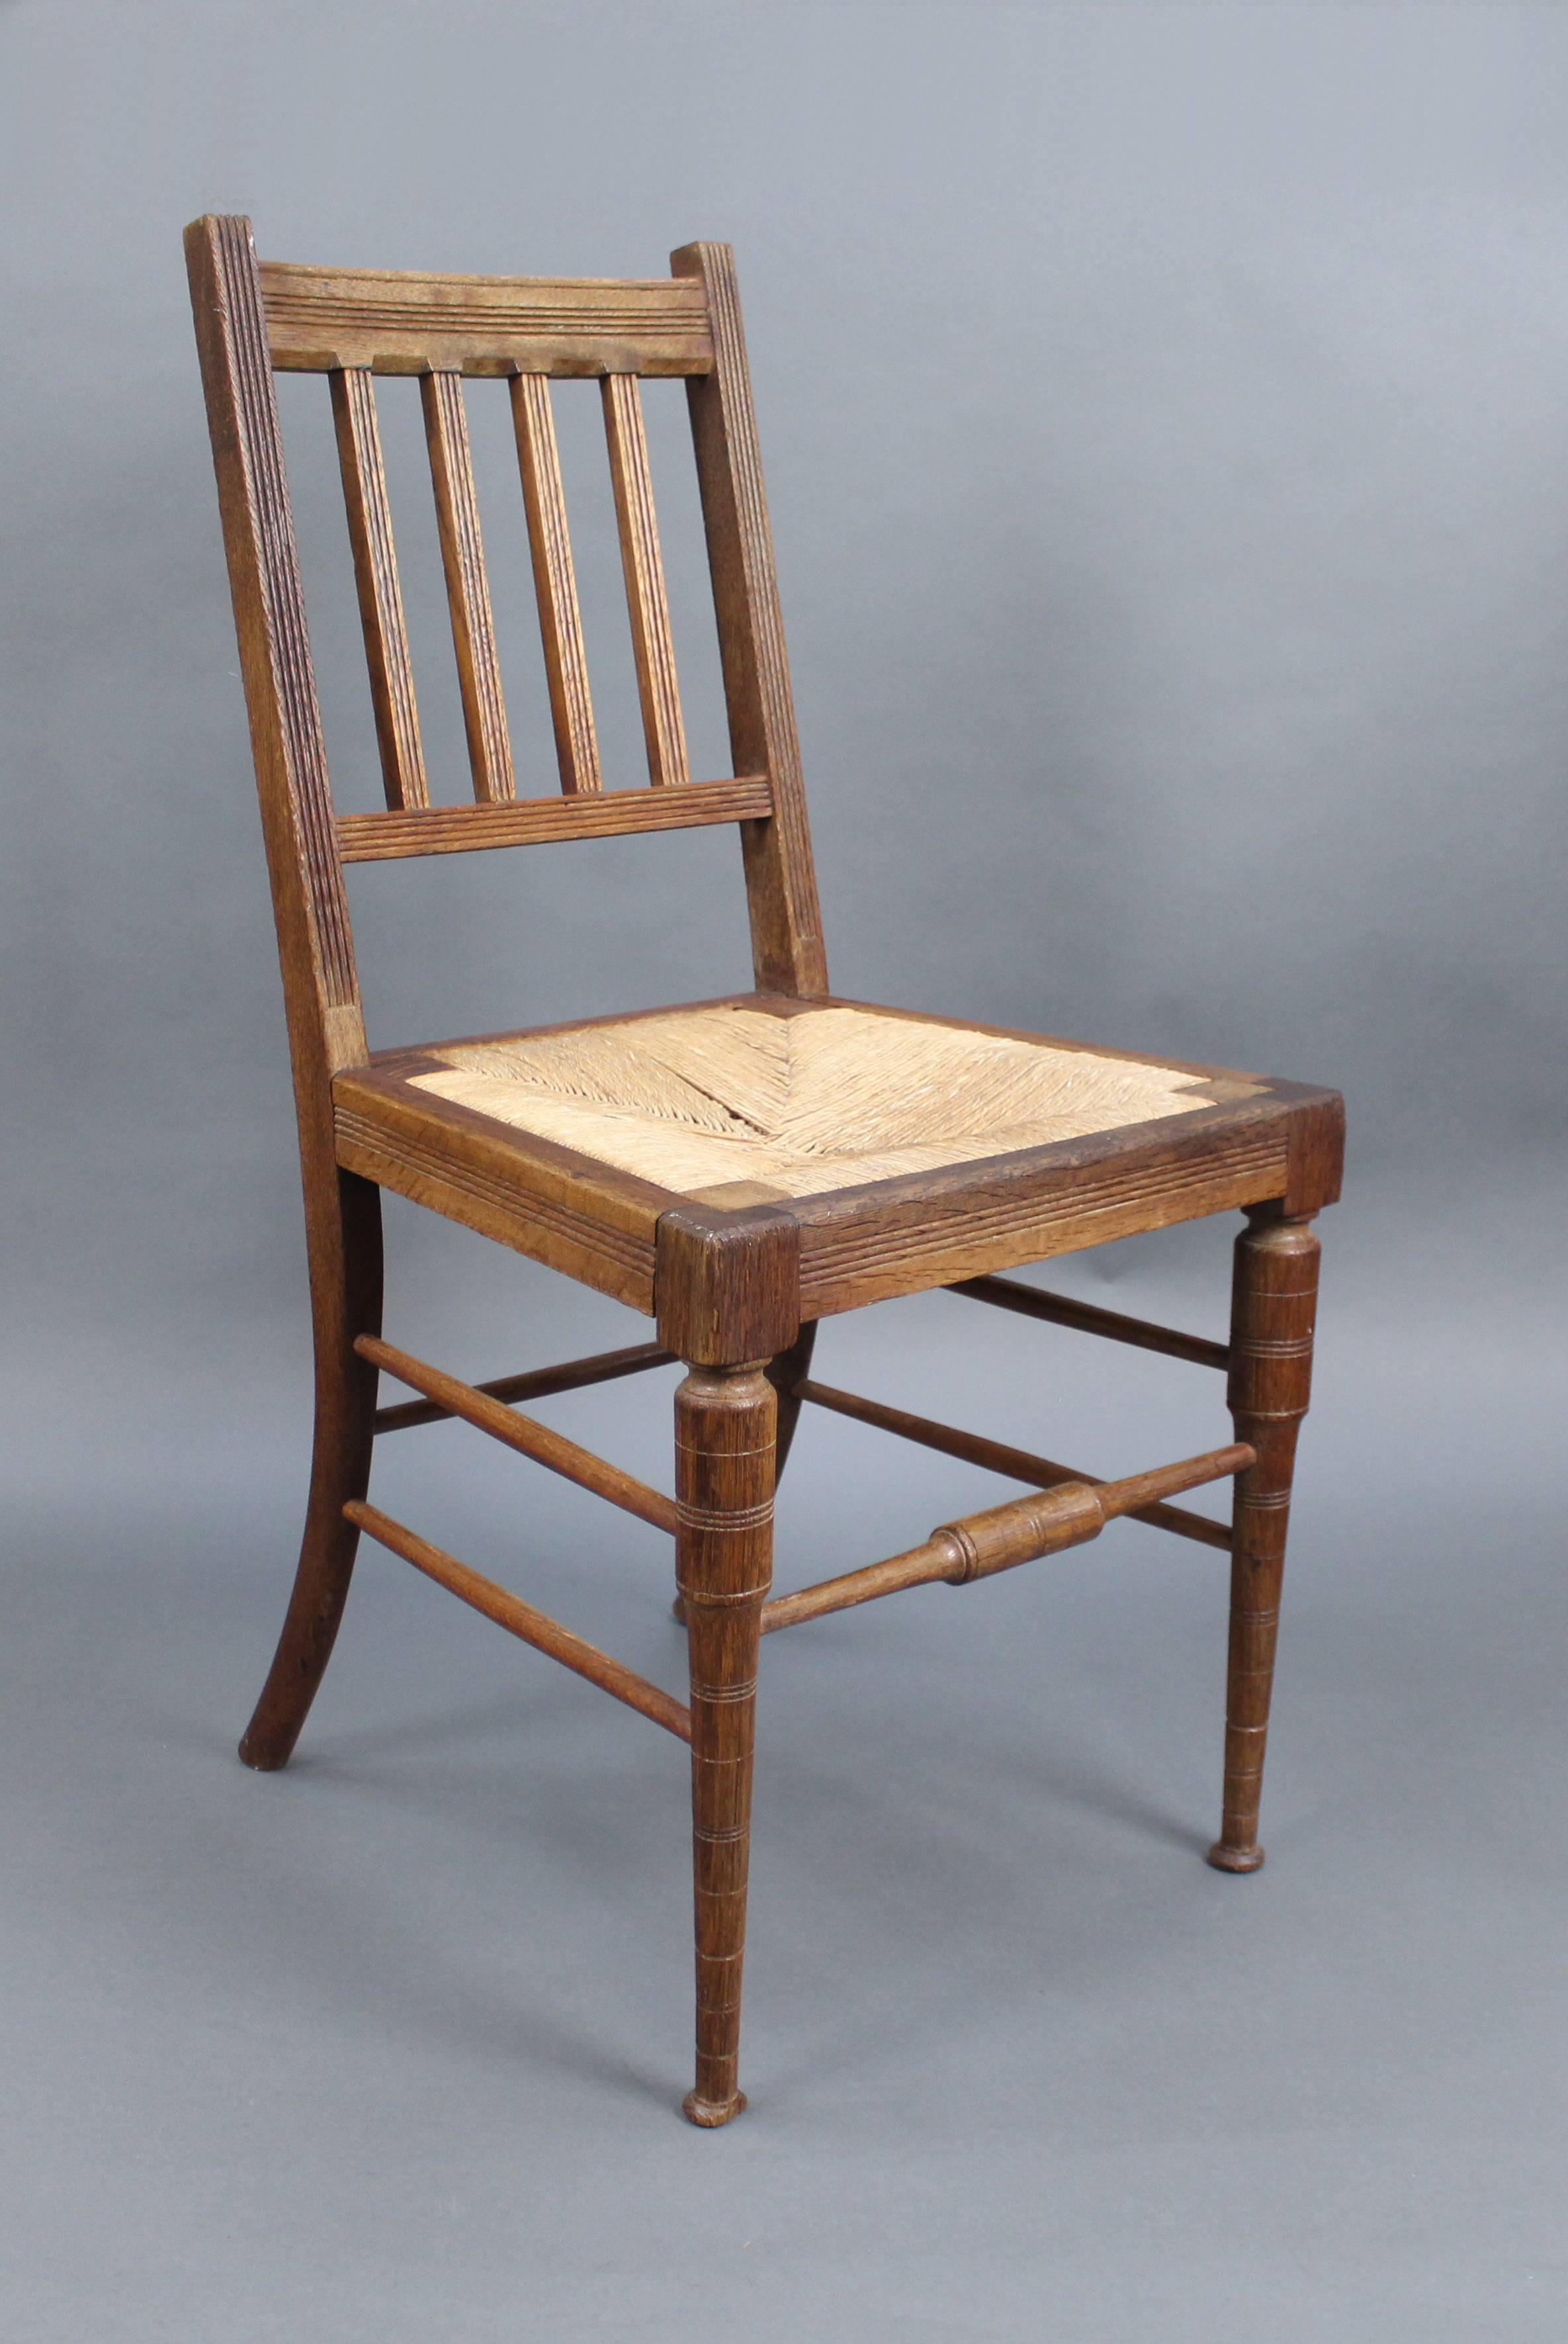 Edwardian Beech Occasional Chair with Rush Seat